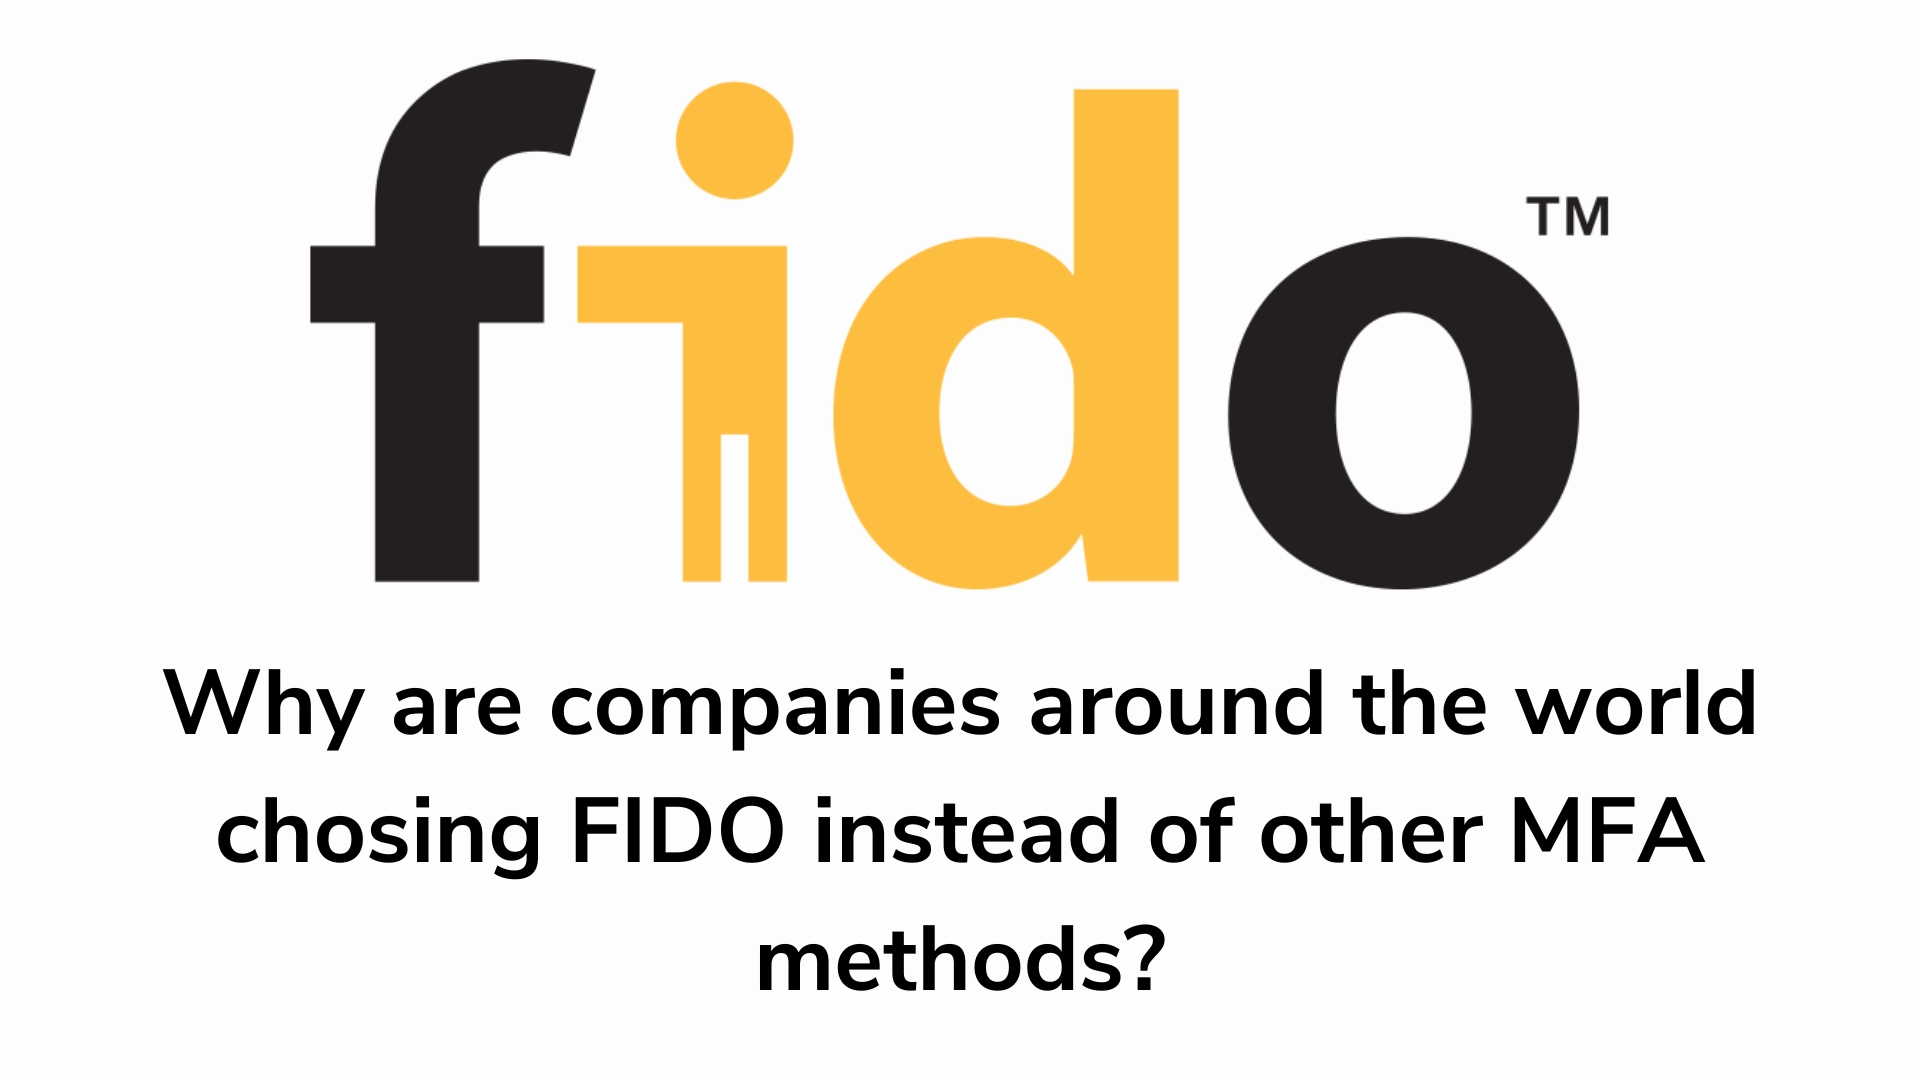 Why are companies around the world chosing FIDO instead of other MFA methods